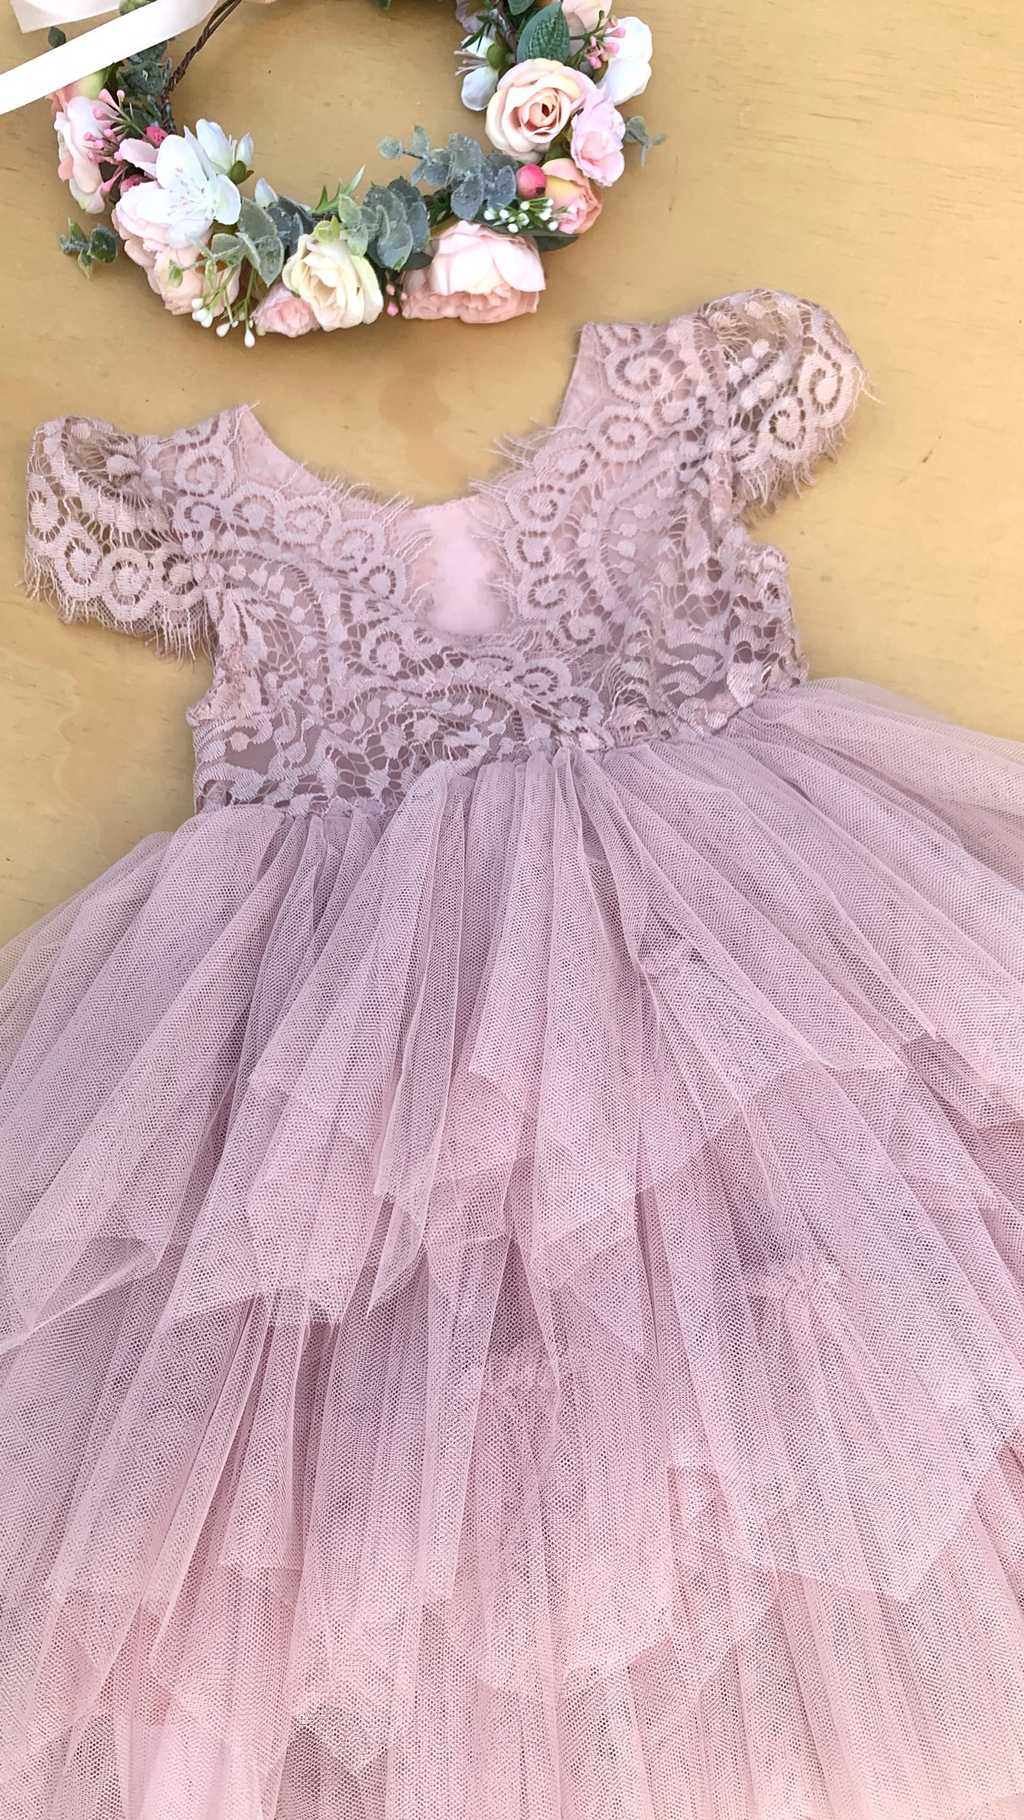 Felicity Capped Sleeve Dusty Pink Girls Dress - Girls Party Dresses